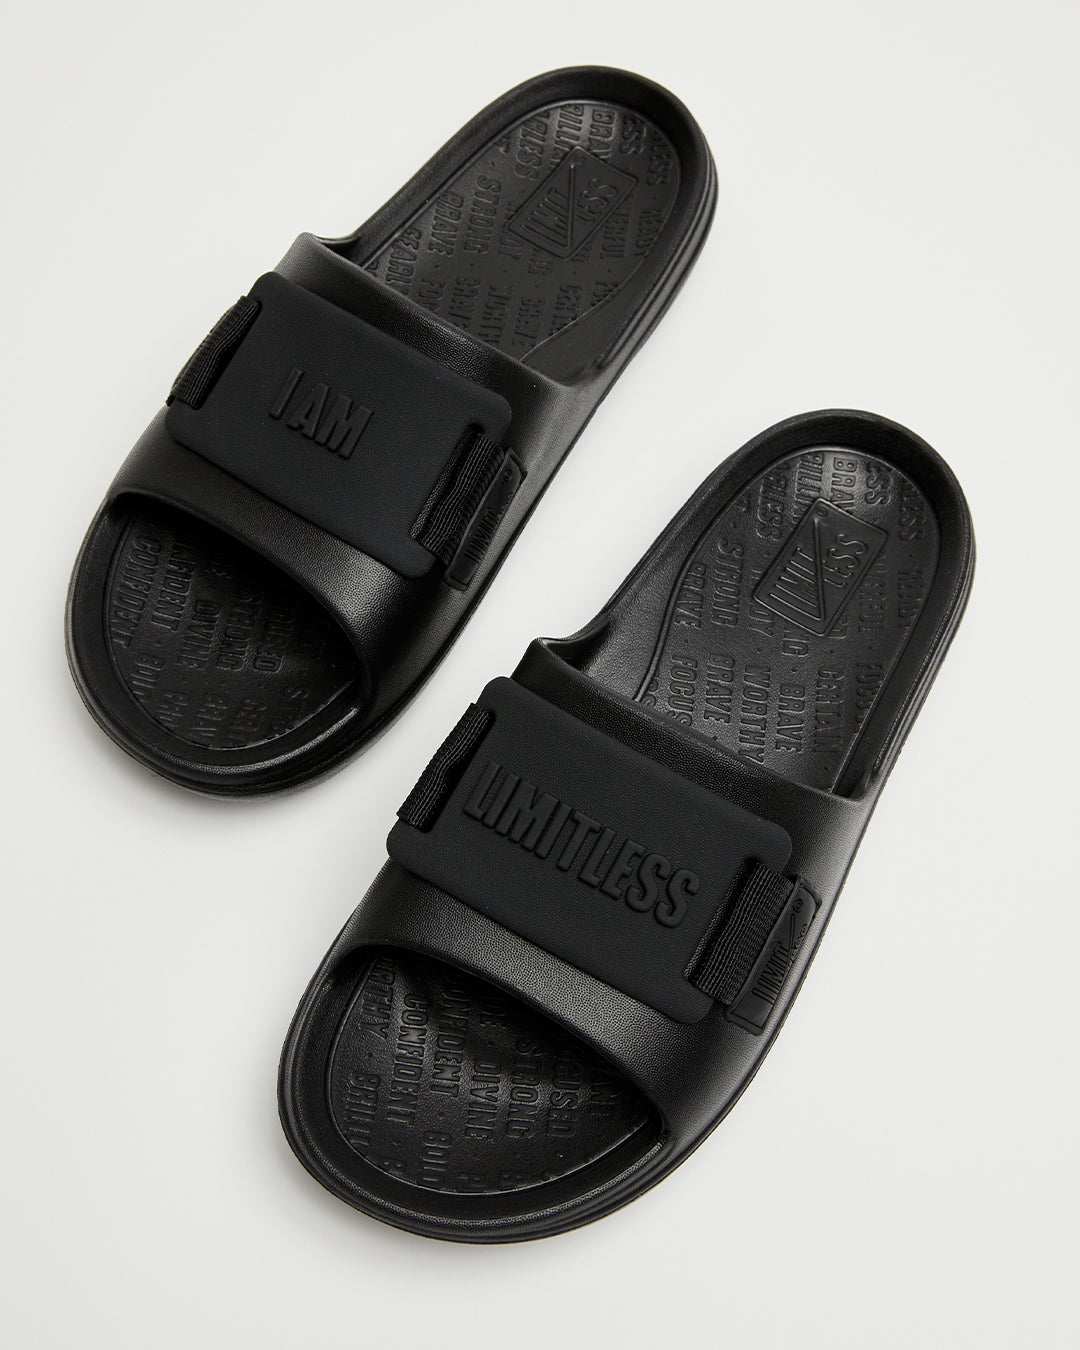 LIMITLESS SLIDES™ WITH ESSENTIAL TIBAH™ QUAD - MITCHELL HIGH SCHOOL EDITION